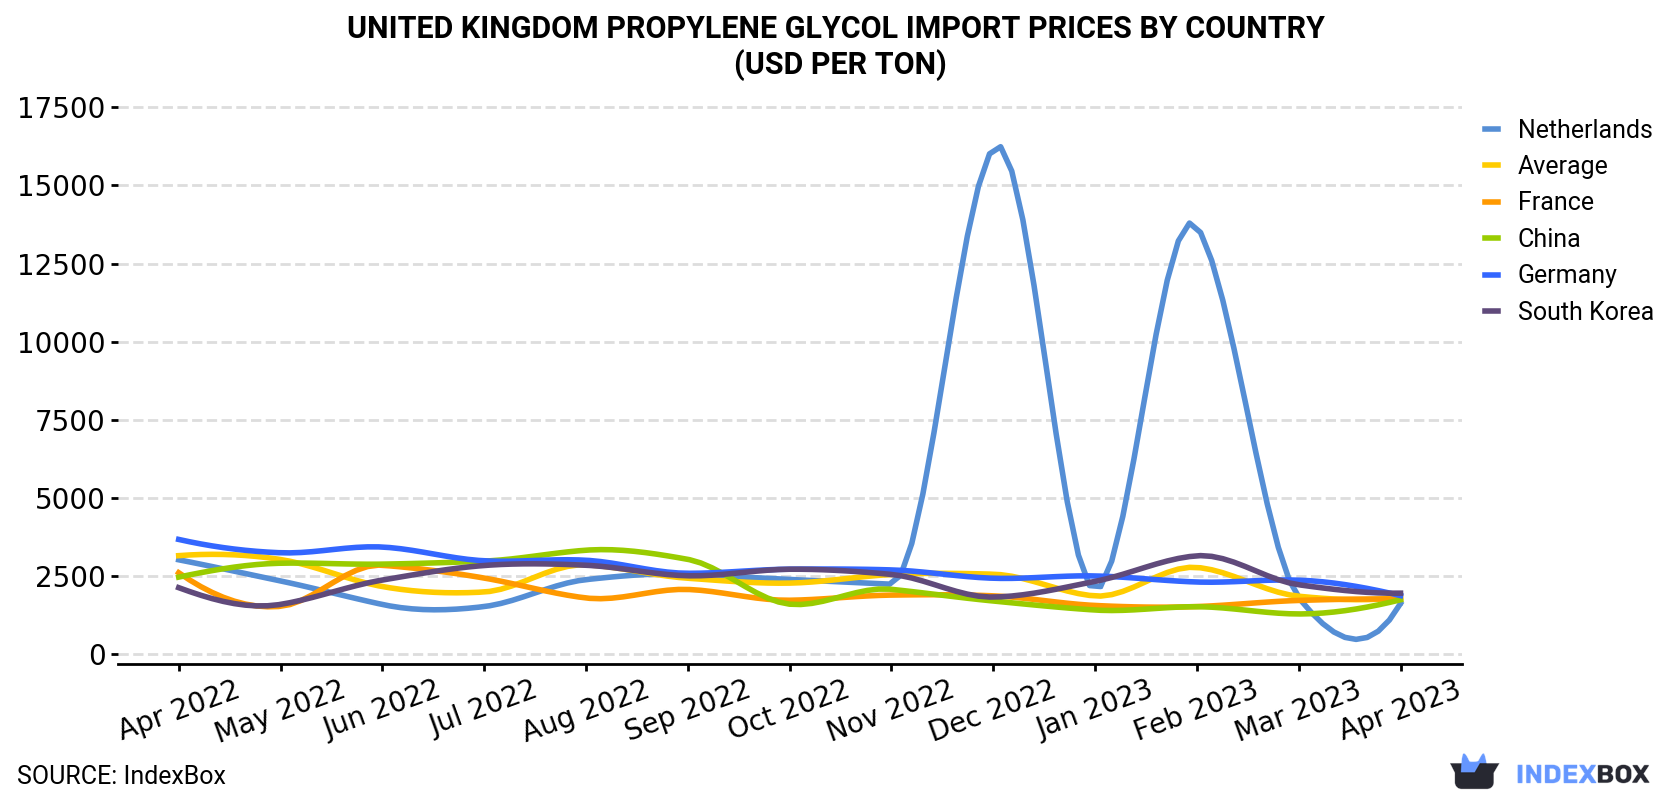 United Kingdom Propylene Glycol Import Prices By Country (USD Per Ton)